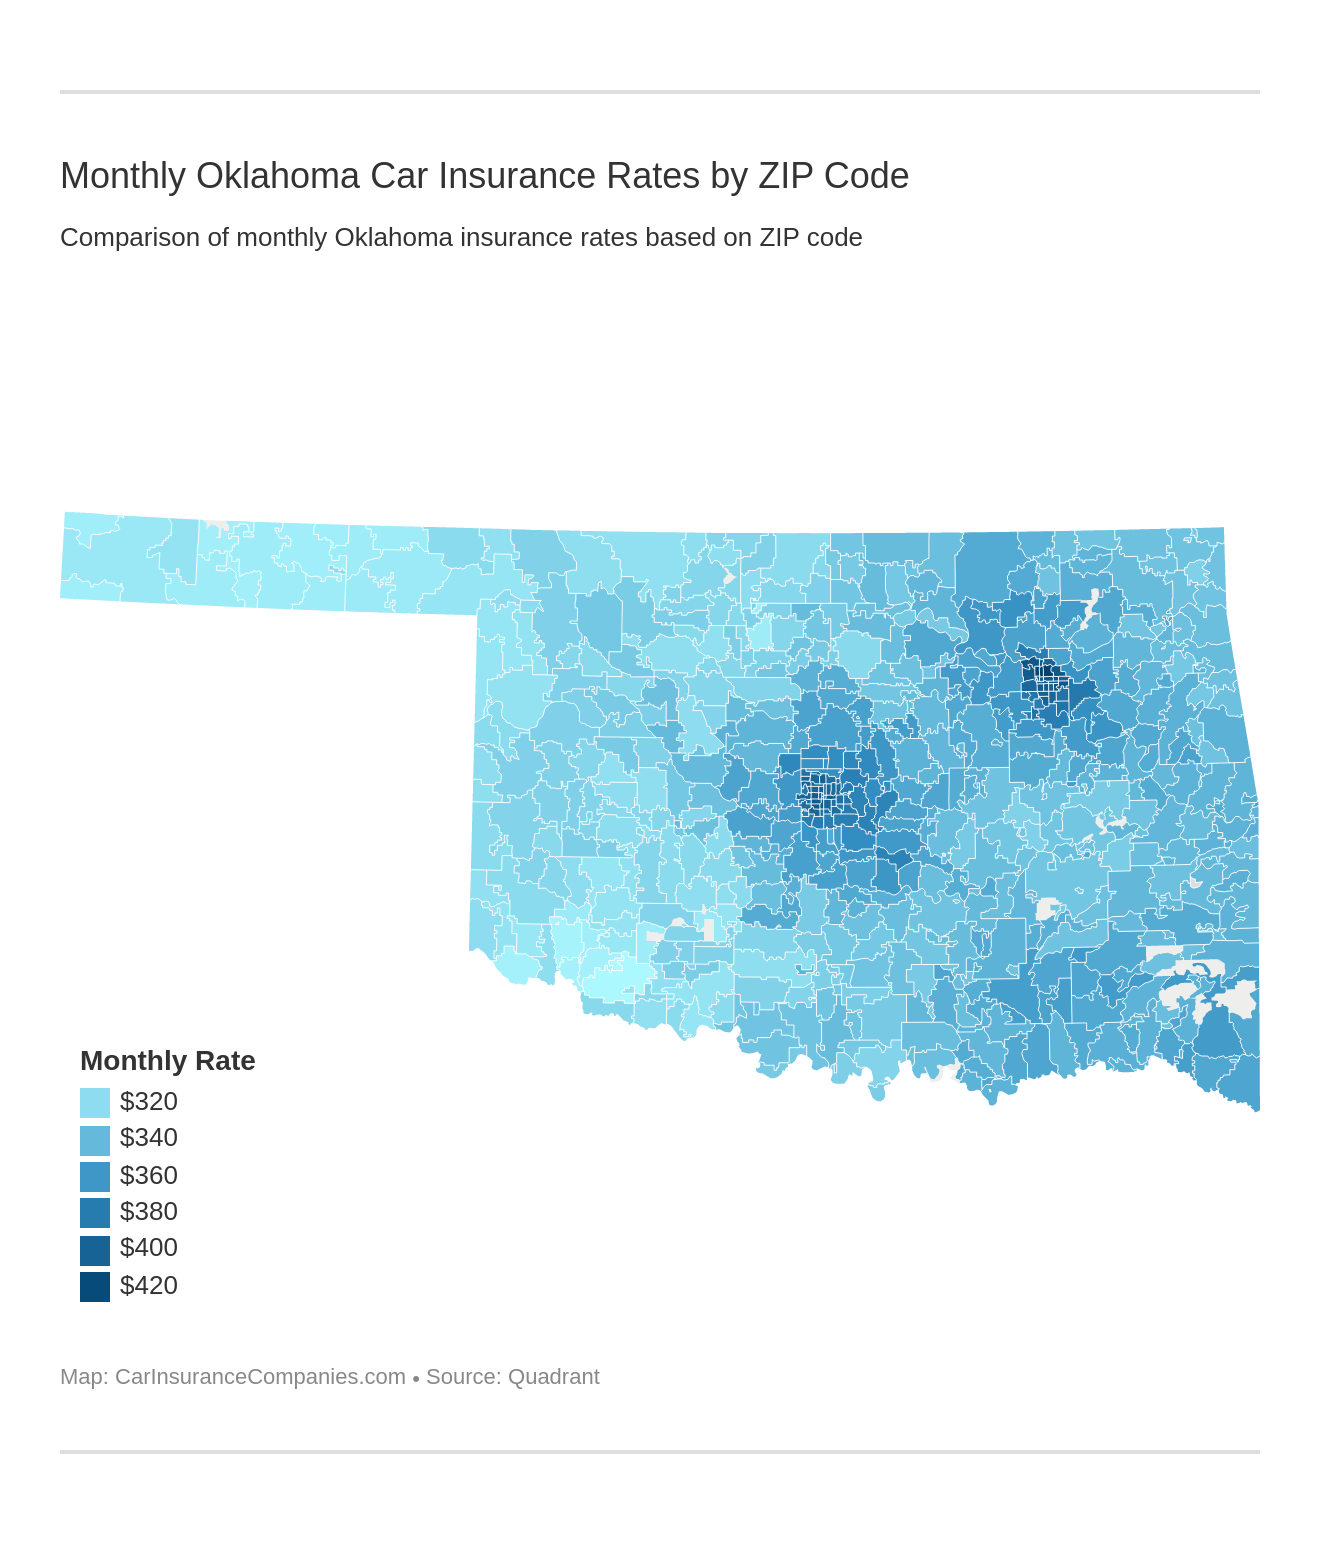 Monthly Oklahoma Car Insurance Rates by ZIP Code